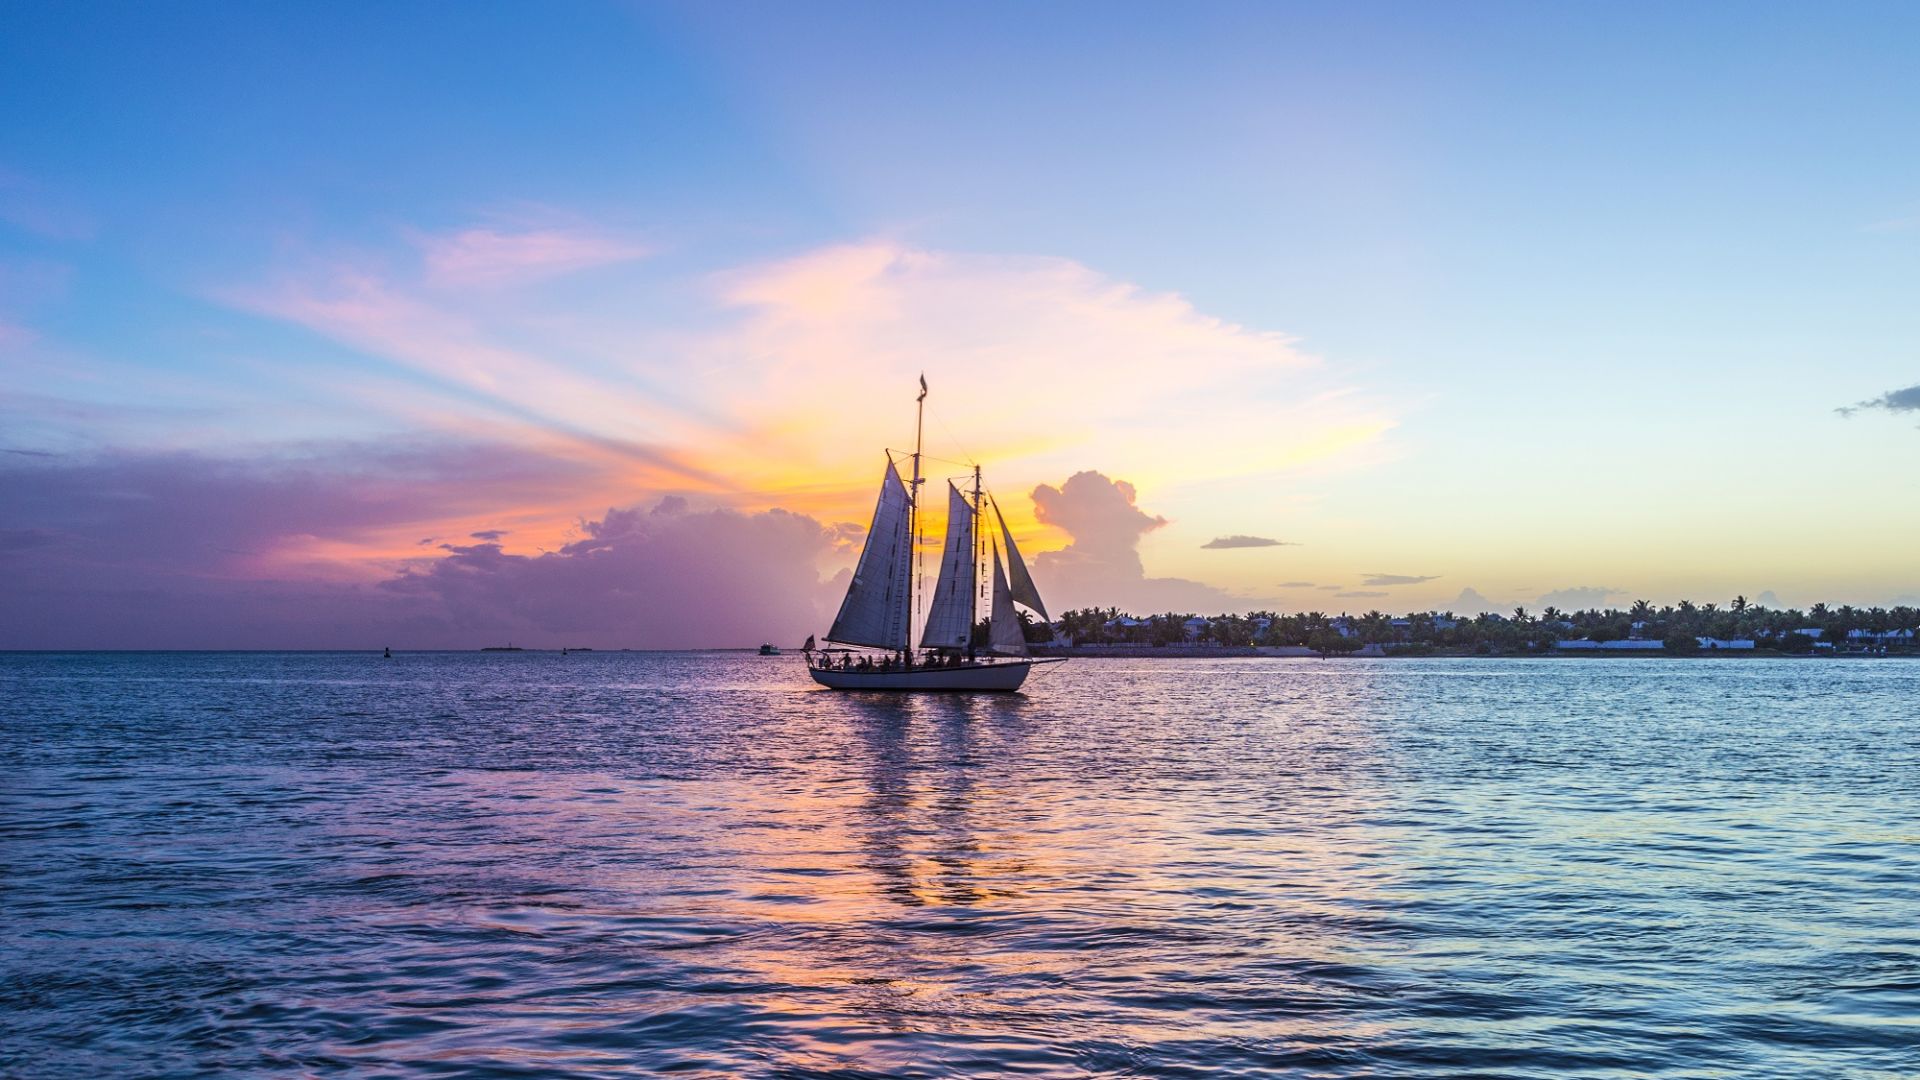 A Sailboat on the water at sunset